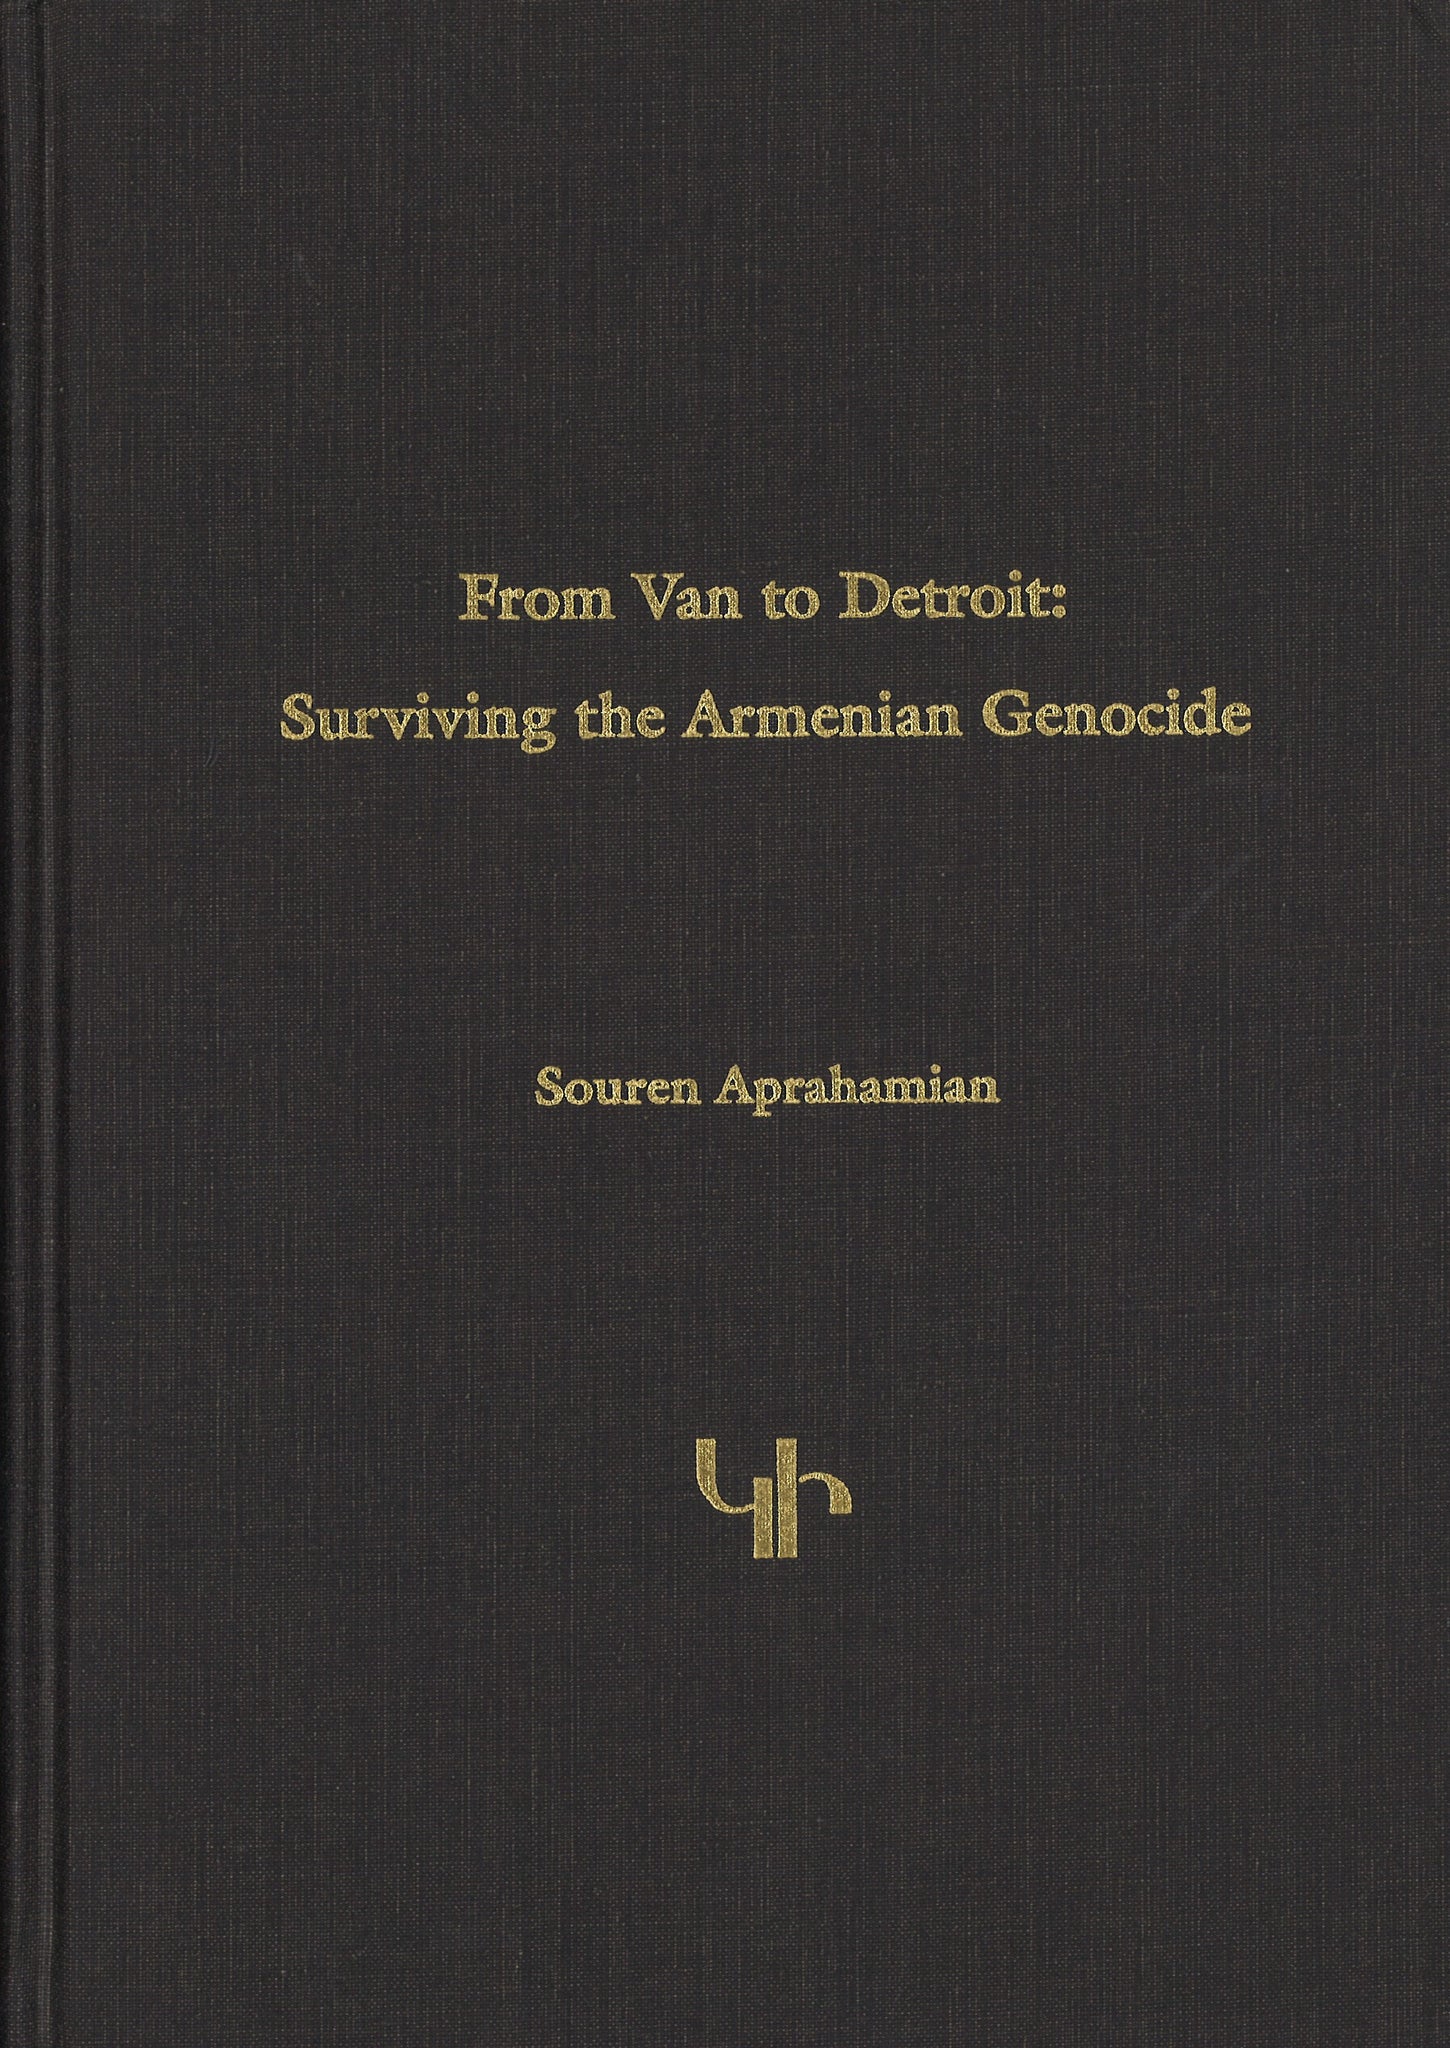 FROM VAN TO DETROIT: Surviving the Armenian Genocide